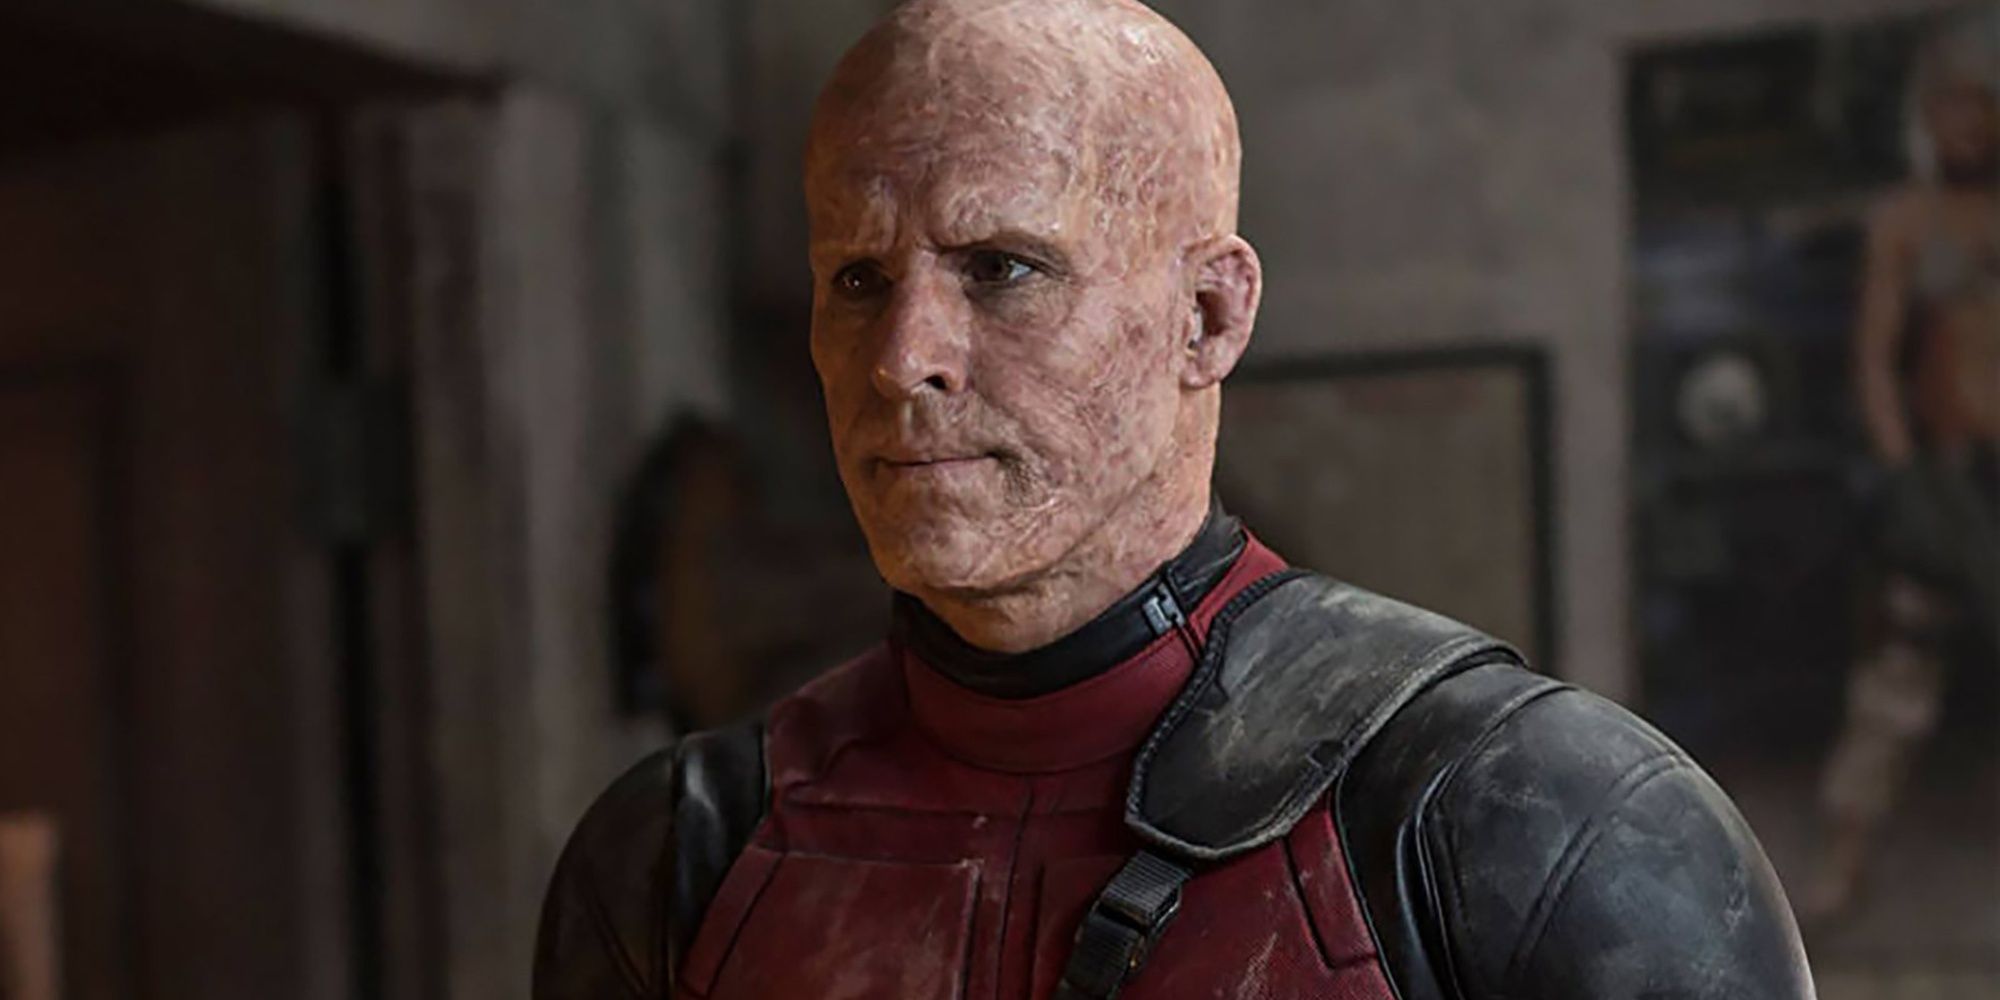 Ryan Reynolds as Deadpool without his mask on.